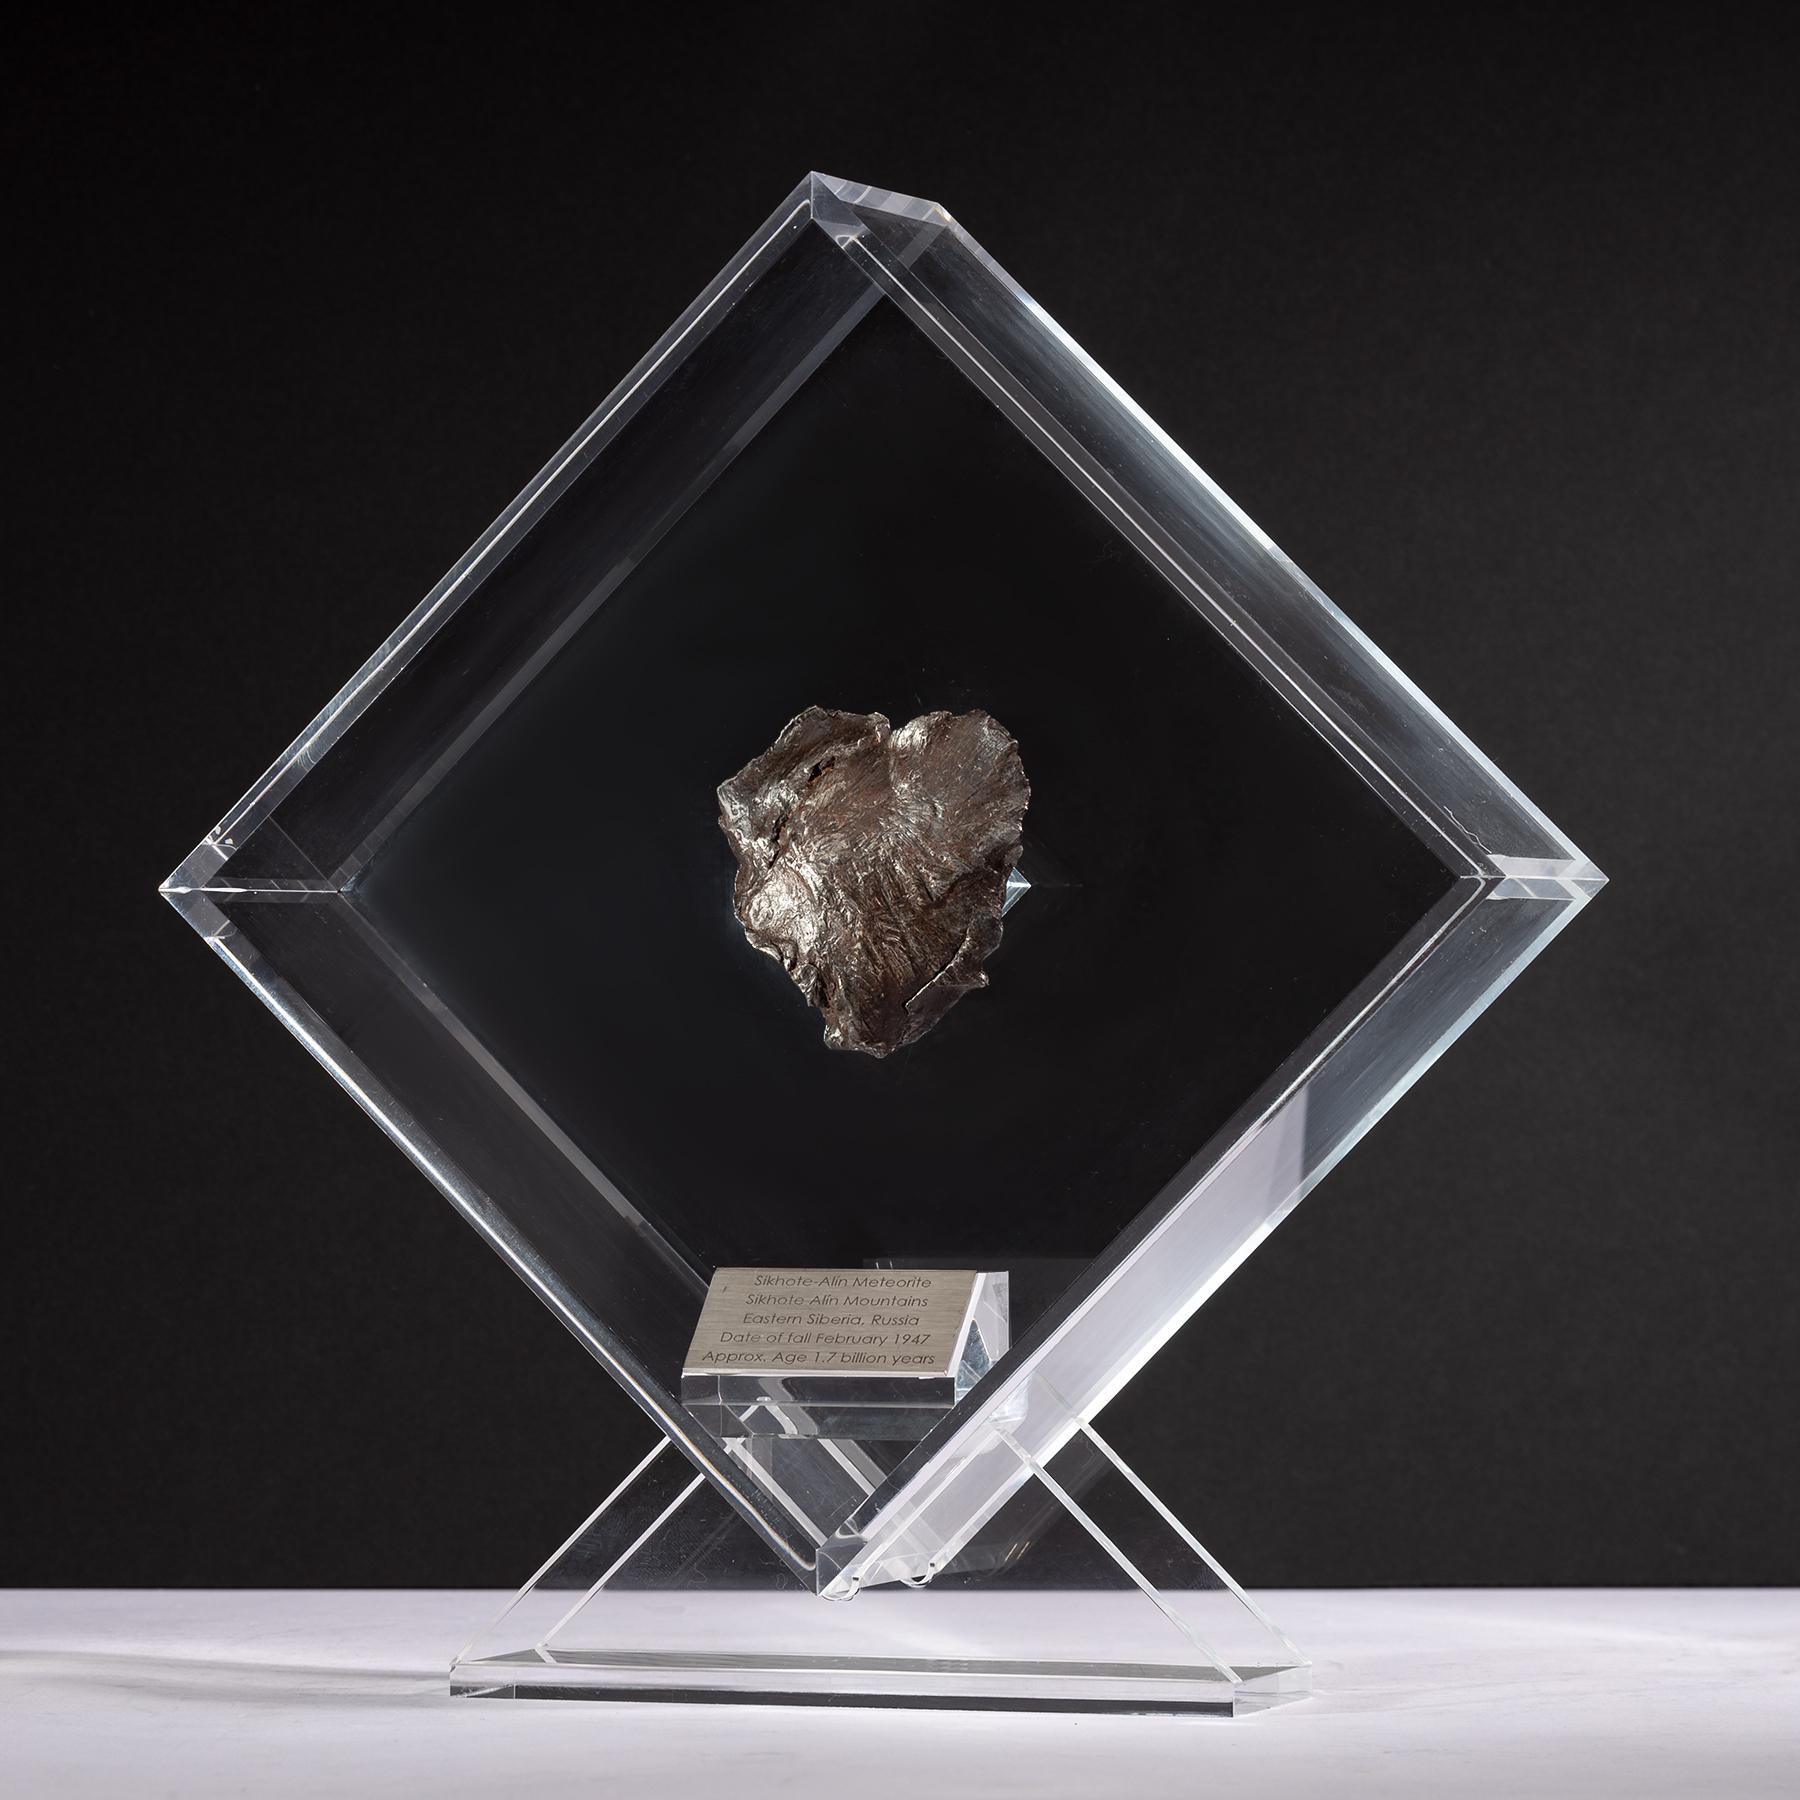 Original design in Acrylic display with a magnet making the meteorite look as it´s floating the same way it did in outer space for years before its final visit to Earth. 

Sikhote Alin Meteorite
This iron meteorite fell in Eastern Siberia, Russia